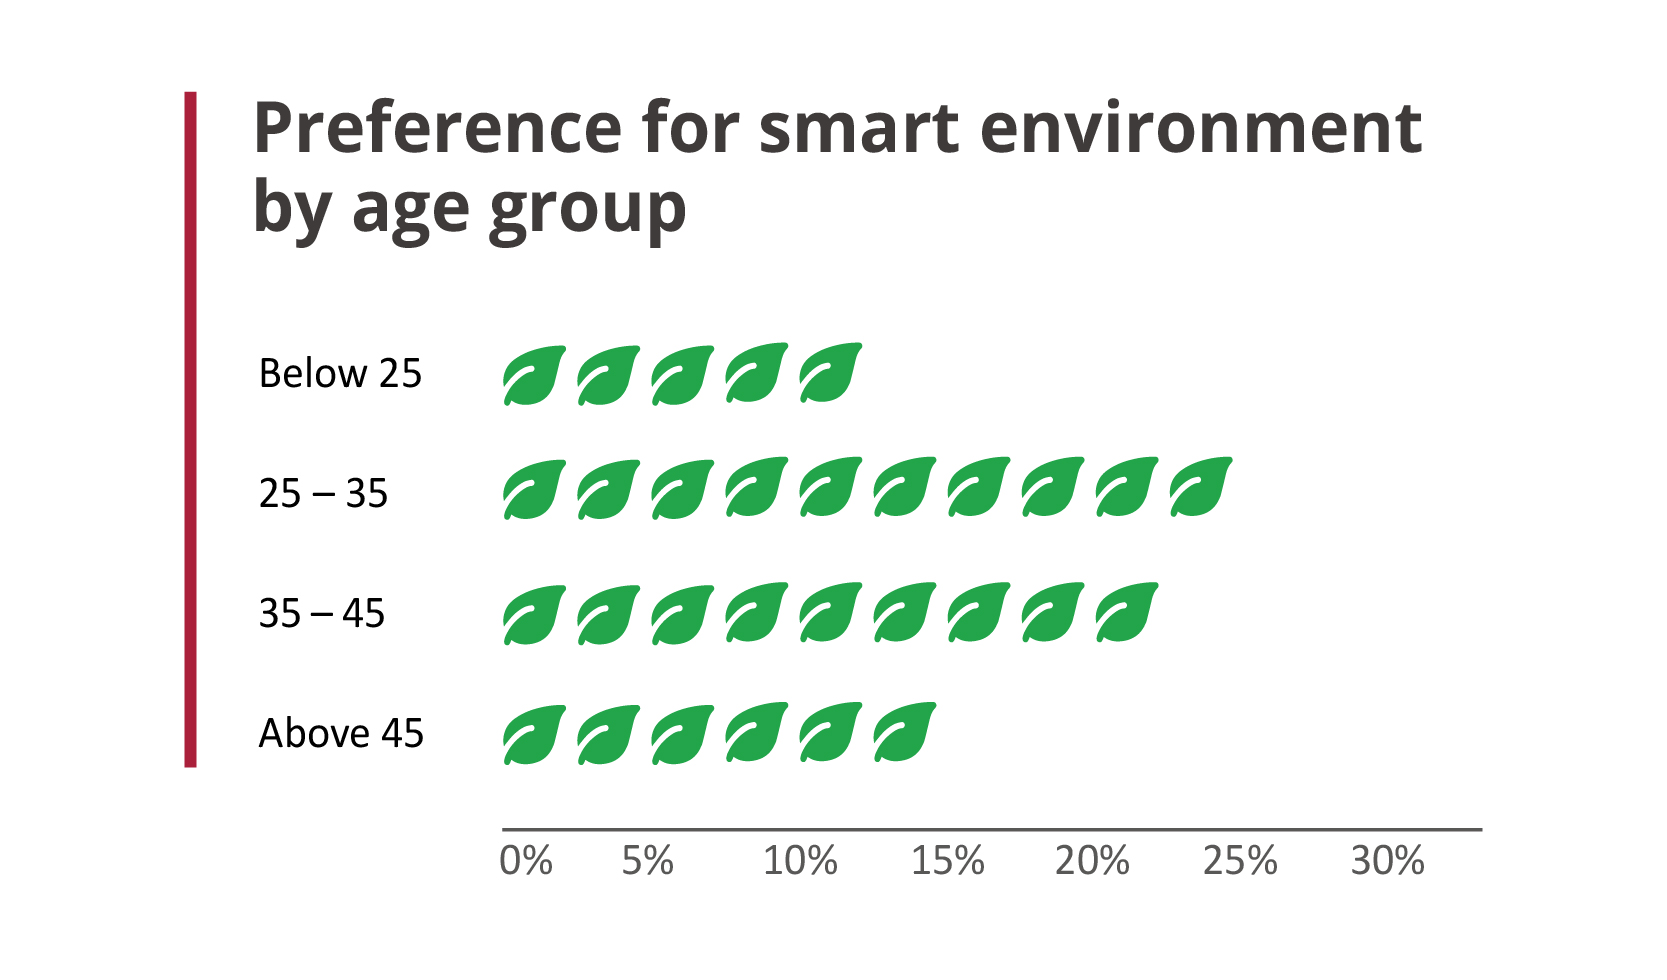 Preference for smart environment by age group